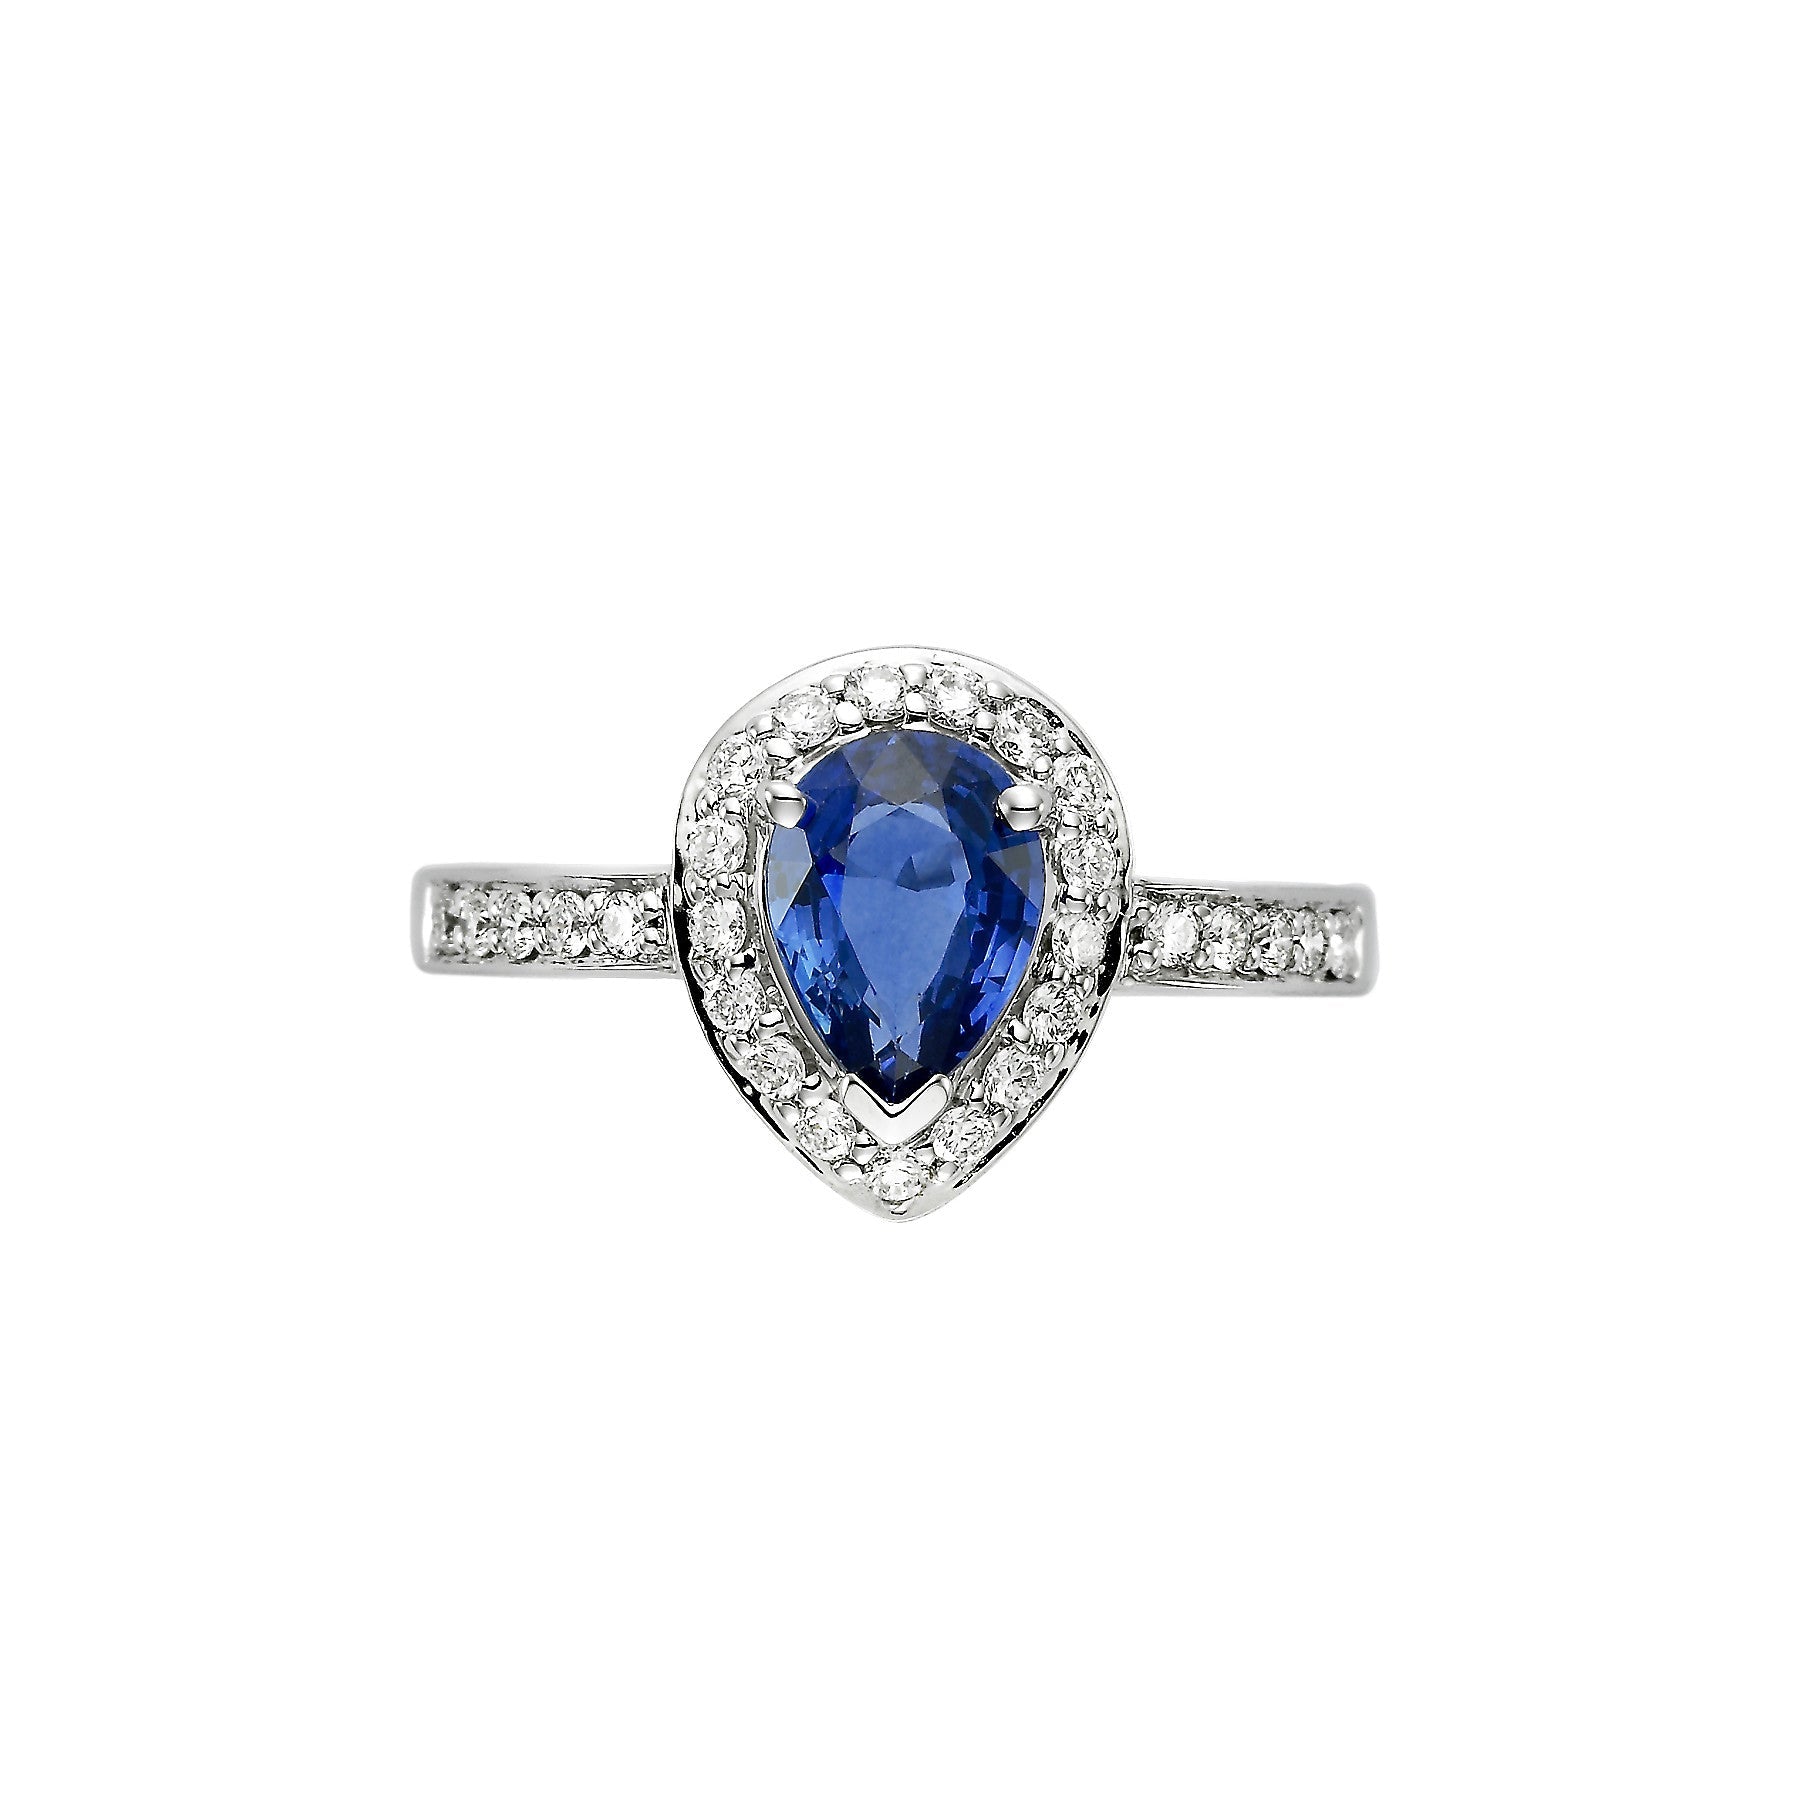 Pear Shaped Blue Sapphire and Diamond Ring - Isaac Westman - 2